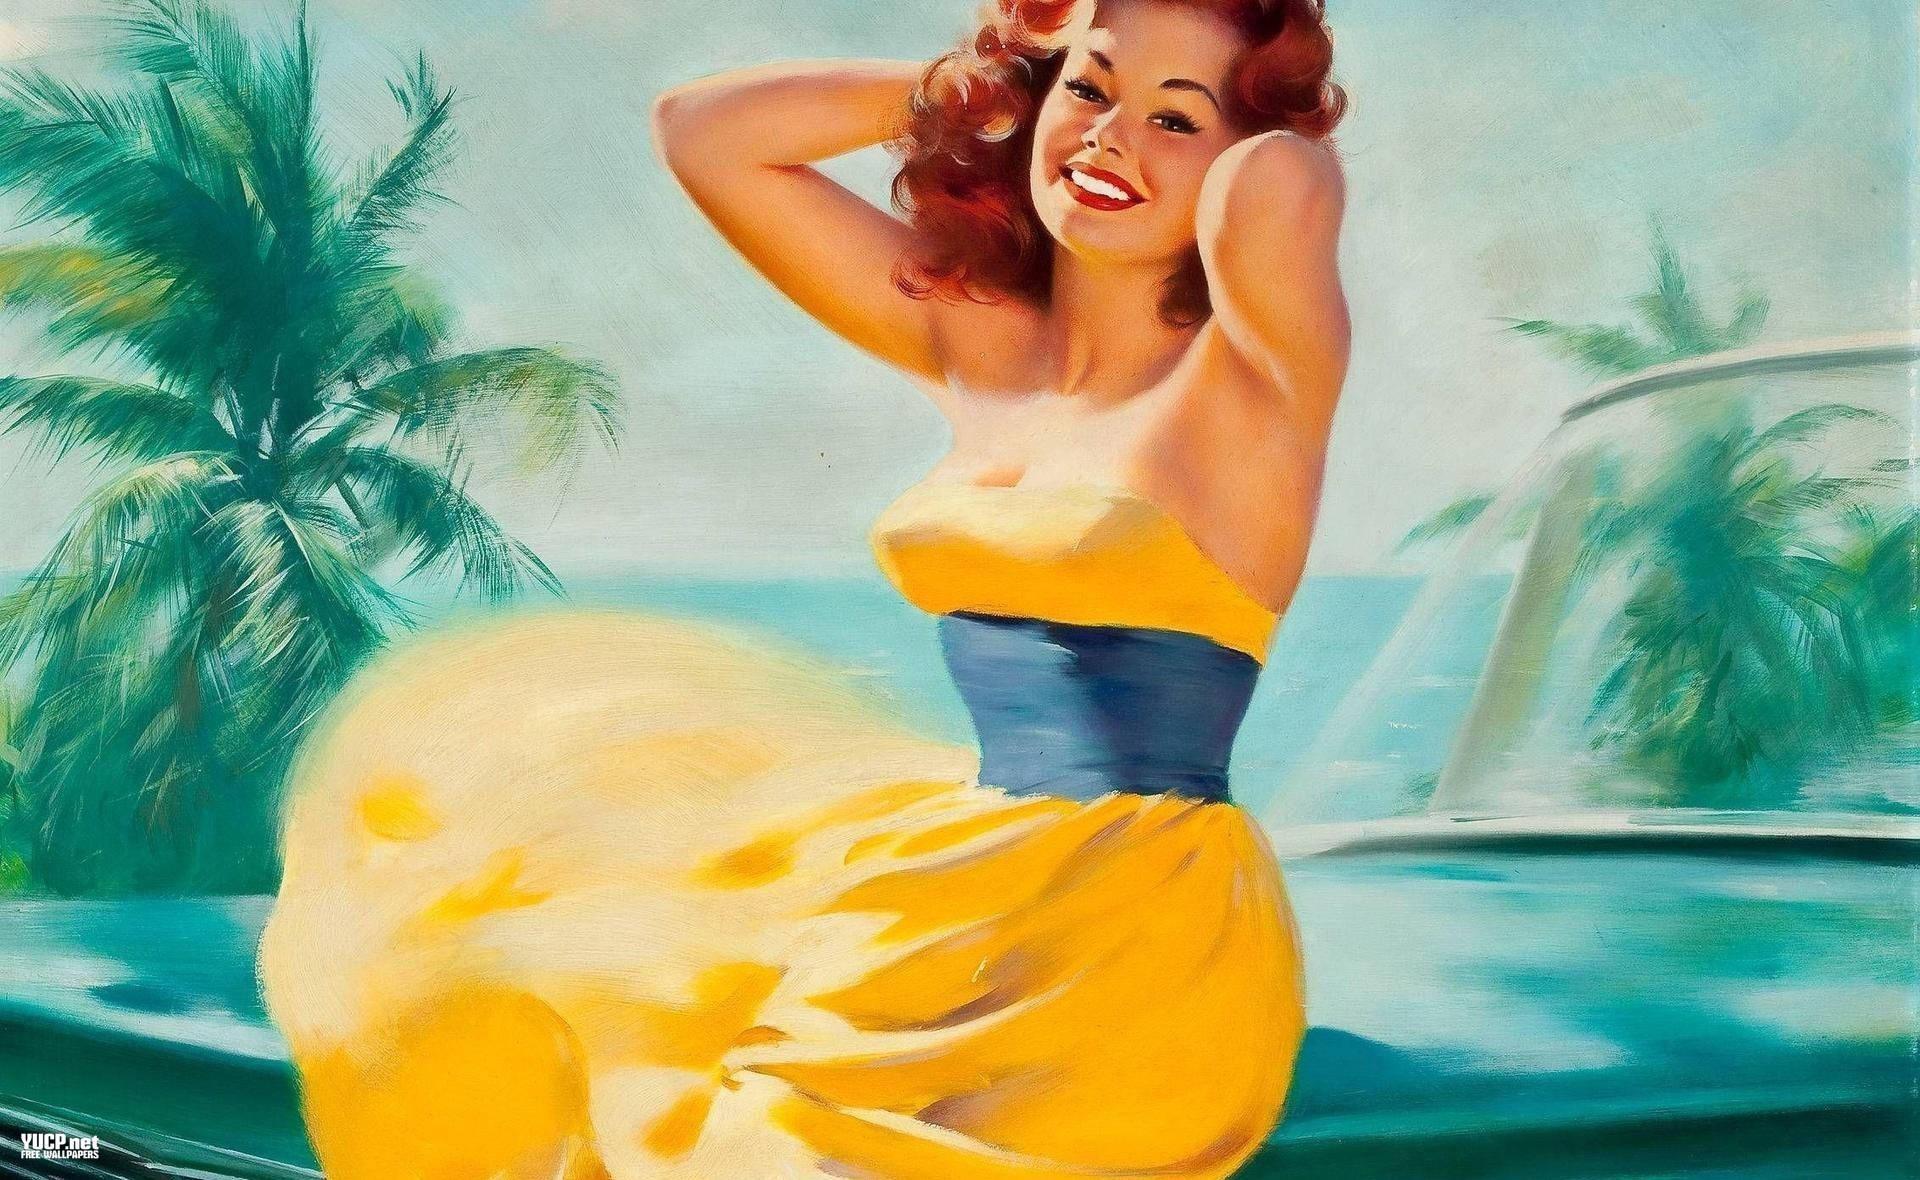 Vintage Pin Up Wallpapers - Top Free